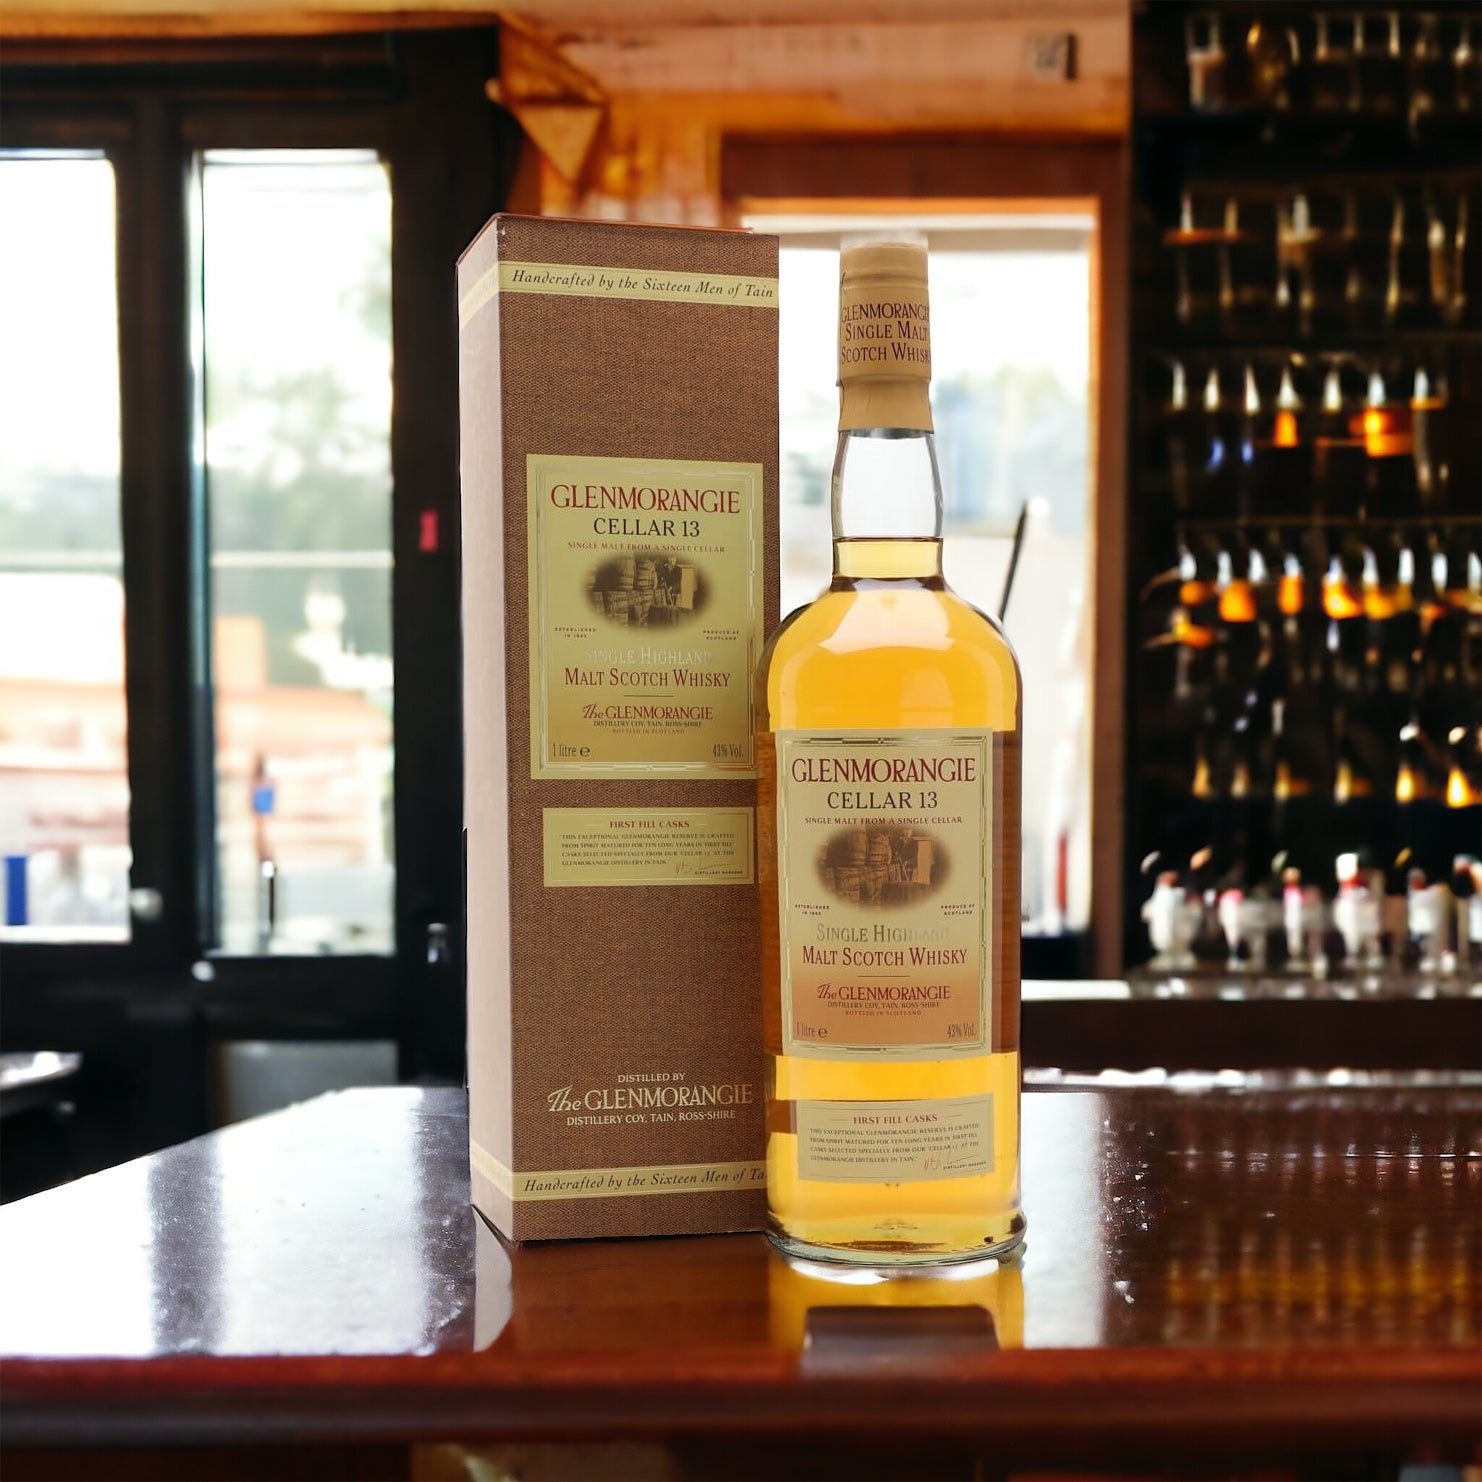 Discover Glenmorangie 10 Year Old Cellar 13: A Taste of the Sea